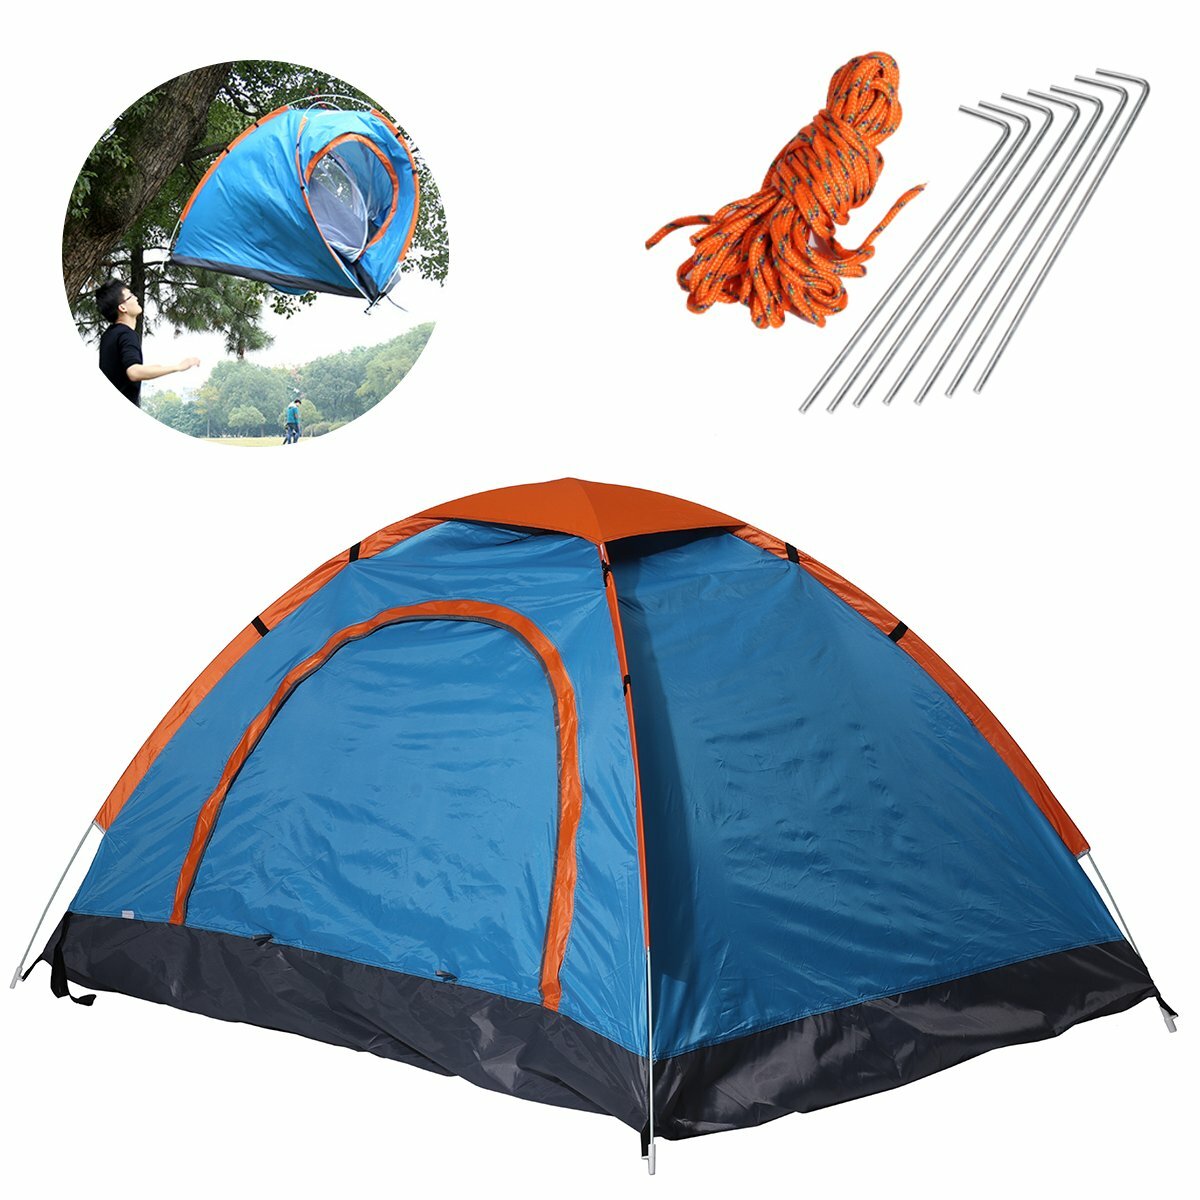 79x59x39inch 2 People Camping Tent Folding Waterproof Ultralight Sunshade Canopy Outdoor Travel Hiki